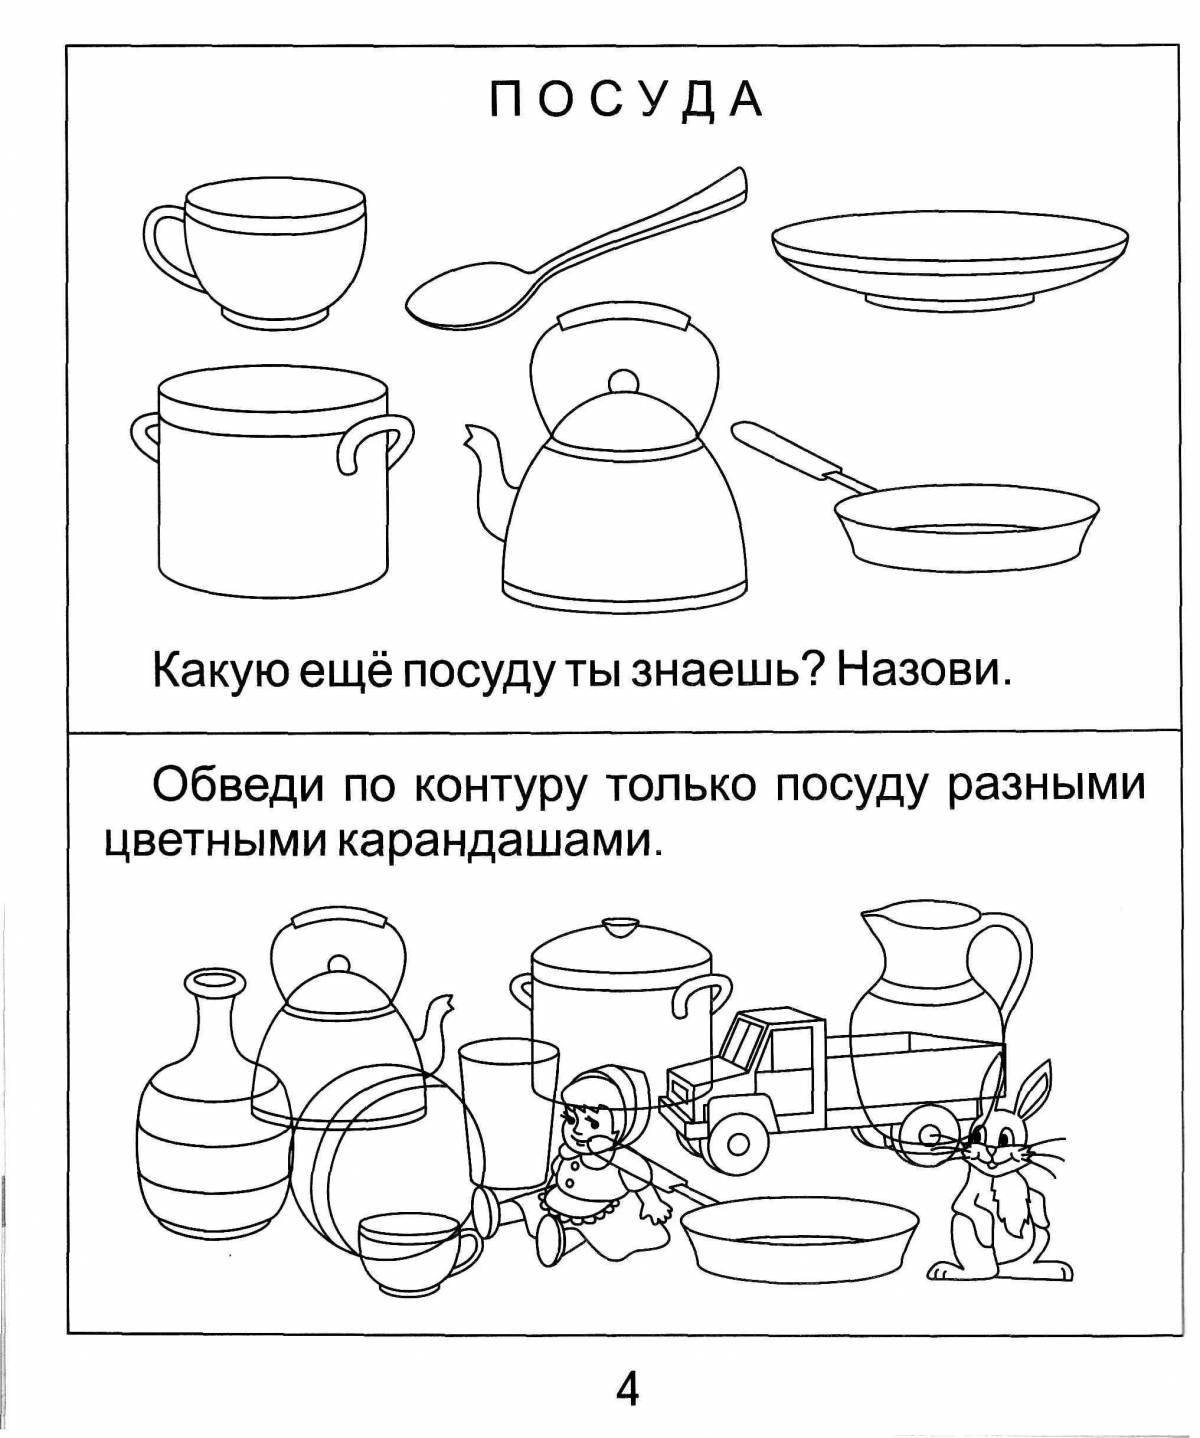 Sweet Dishes Coloring Page for Preschoolers